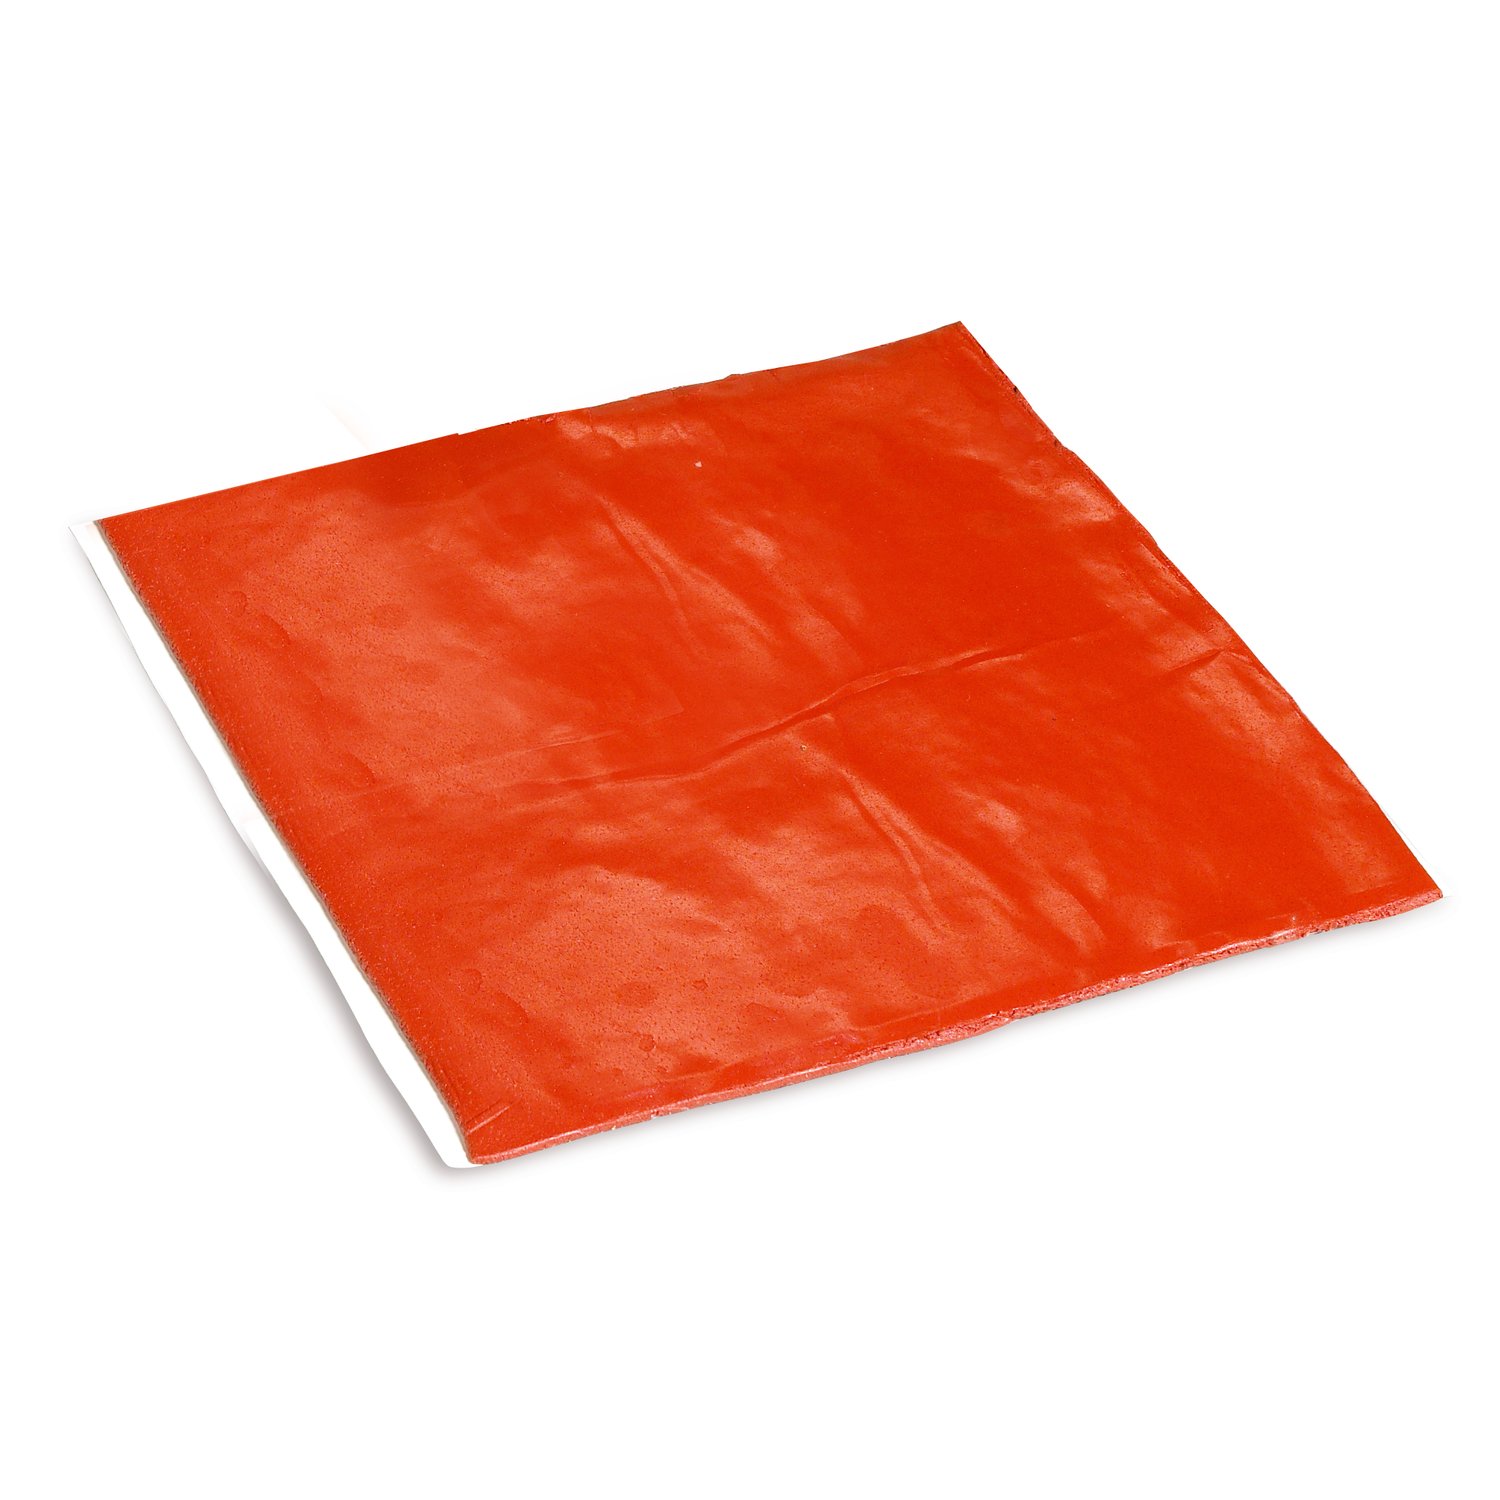 7000031965 - 3M Fire Barrier Moldable Putty Pads MPP+, Red, 9.5 in x 9.5 in, 20
Each/Case